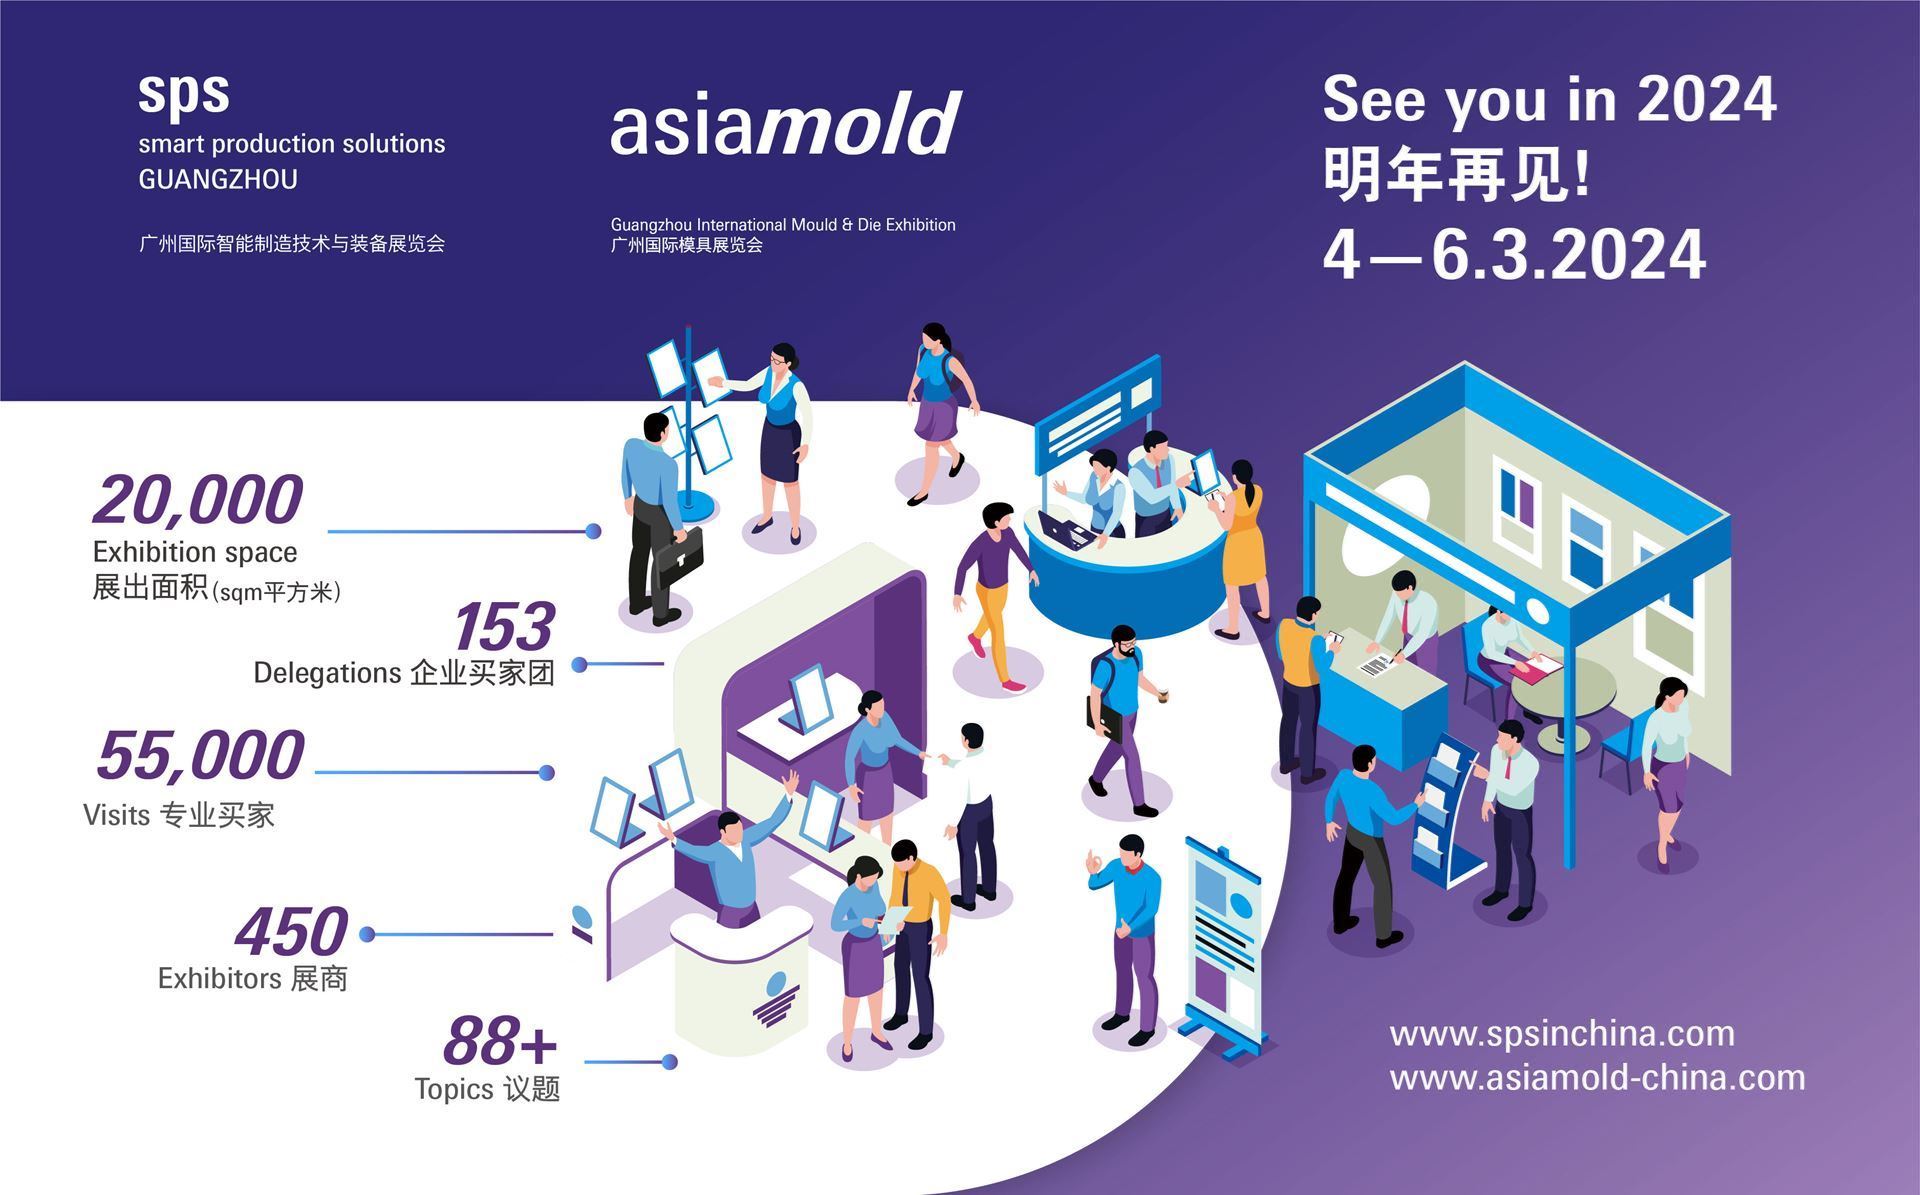 Asiamold Select - Guangzhou received positive feedback from visitors